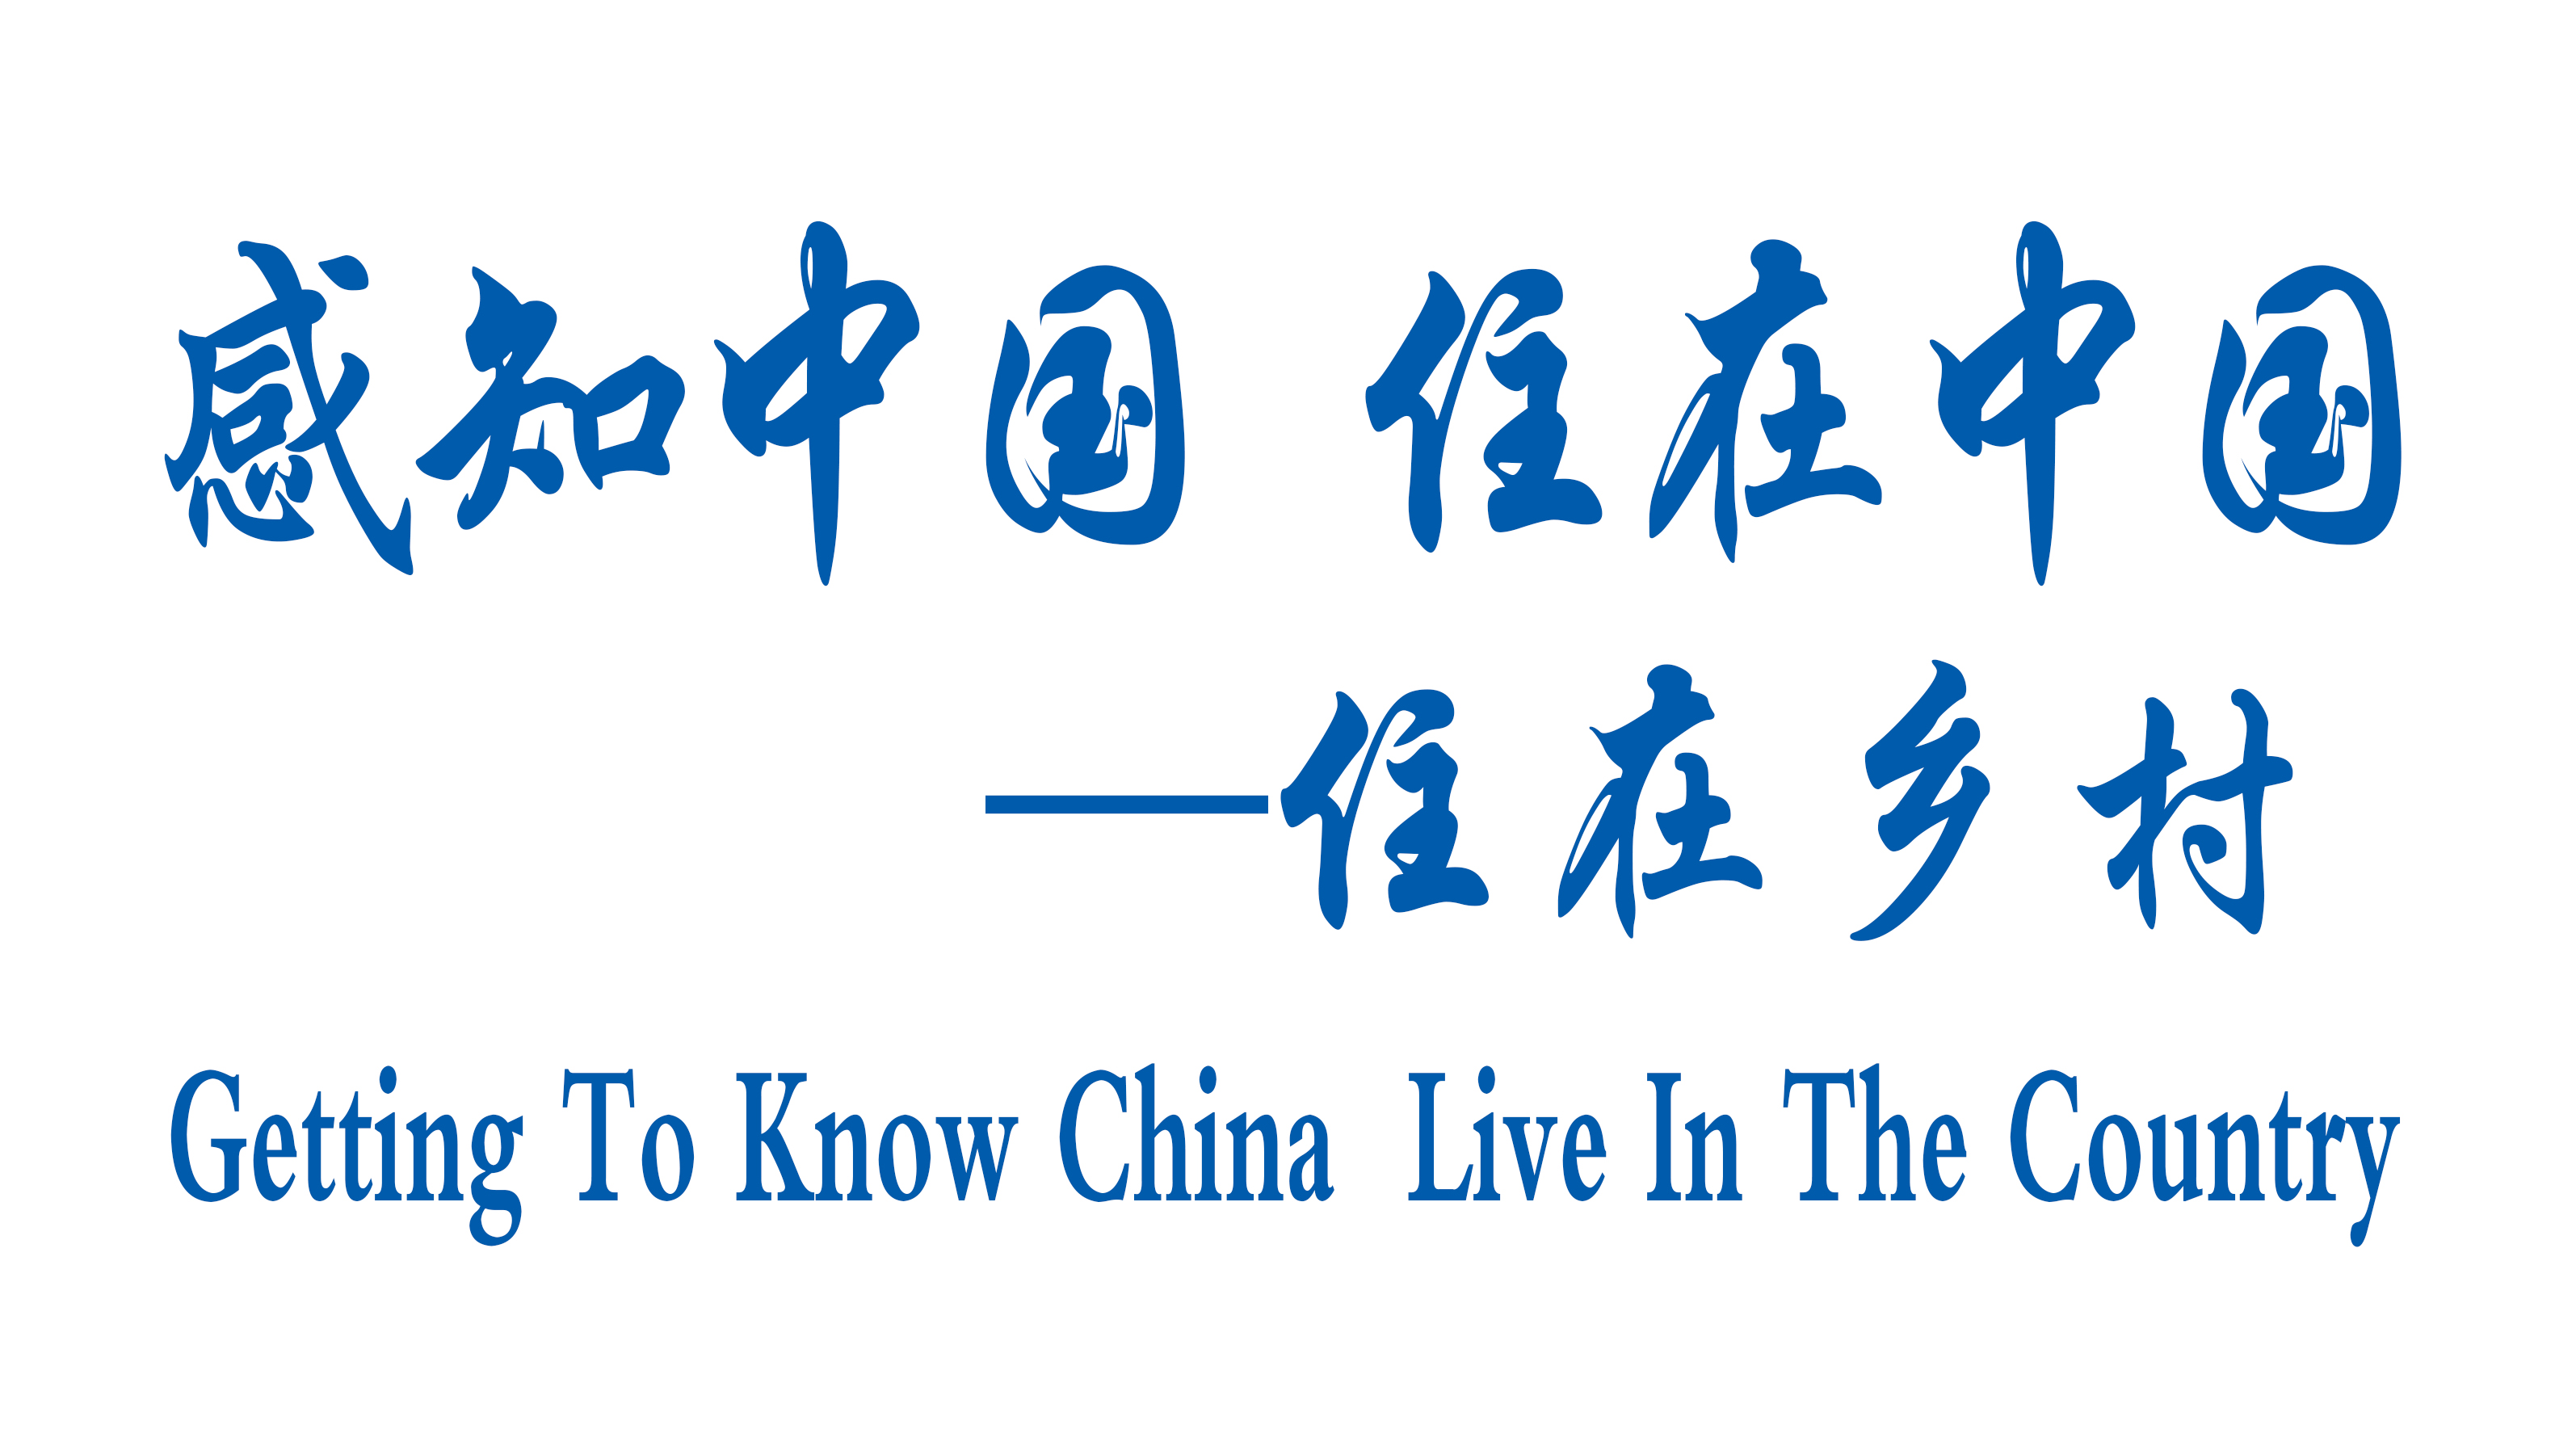 Getting To Know China —Live In The Country